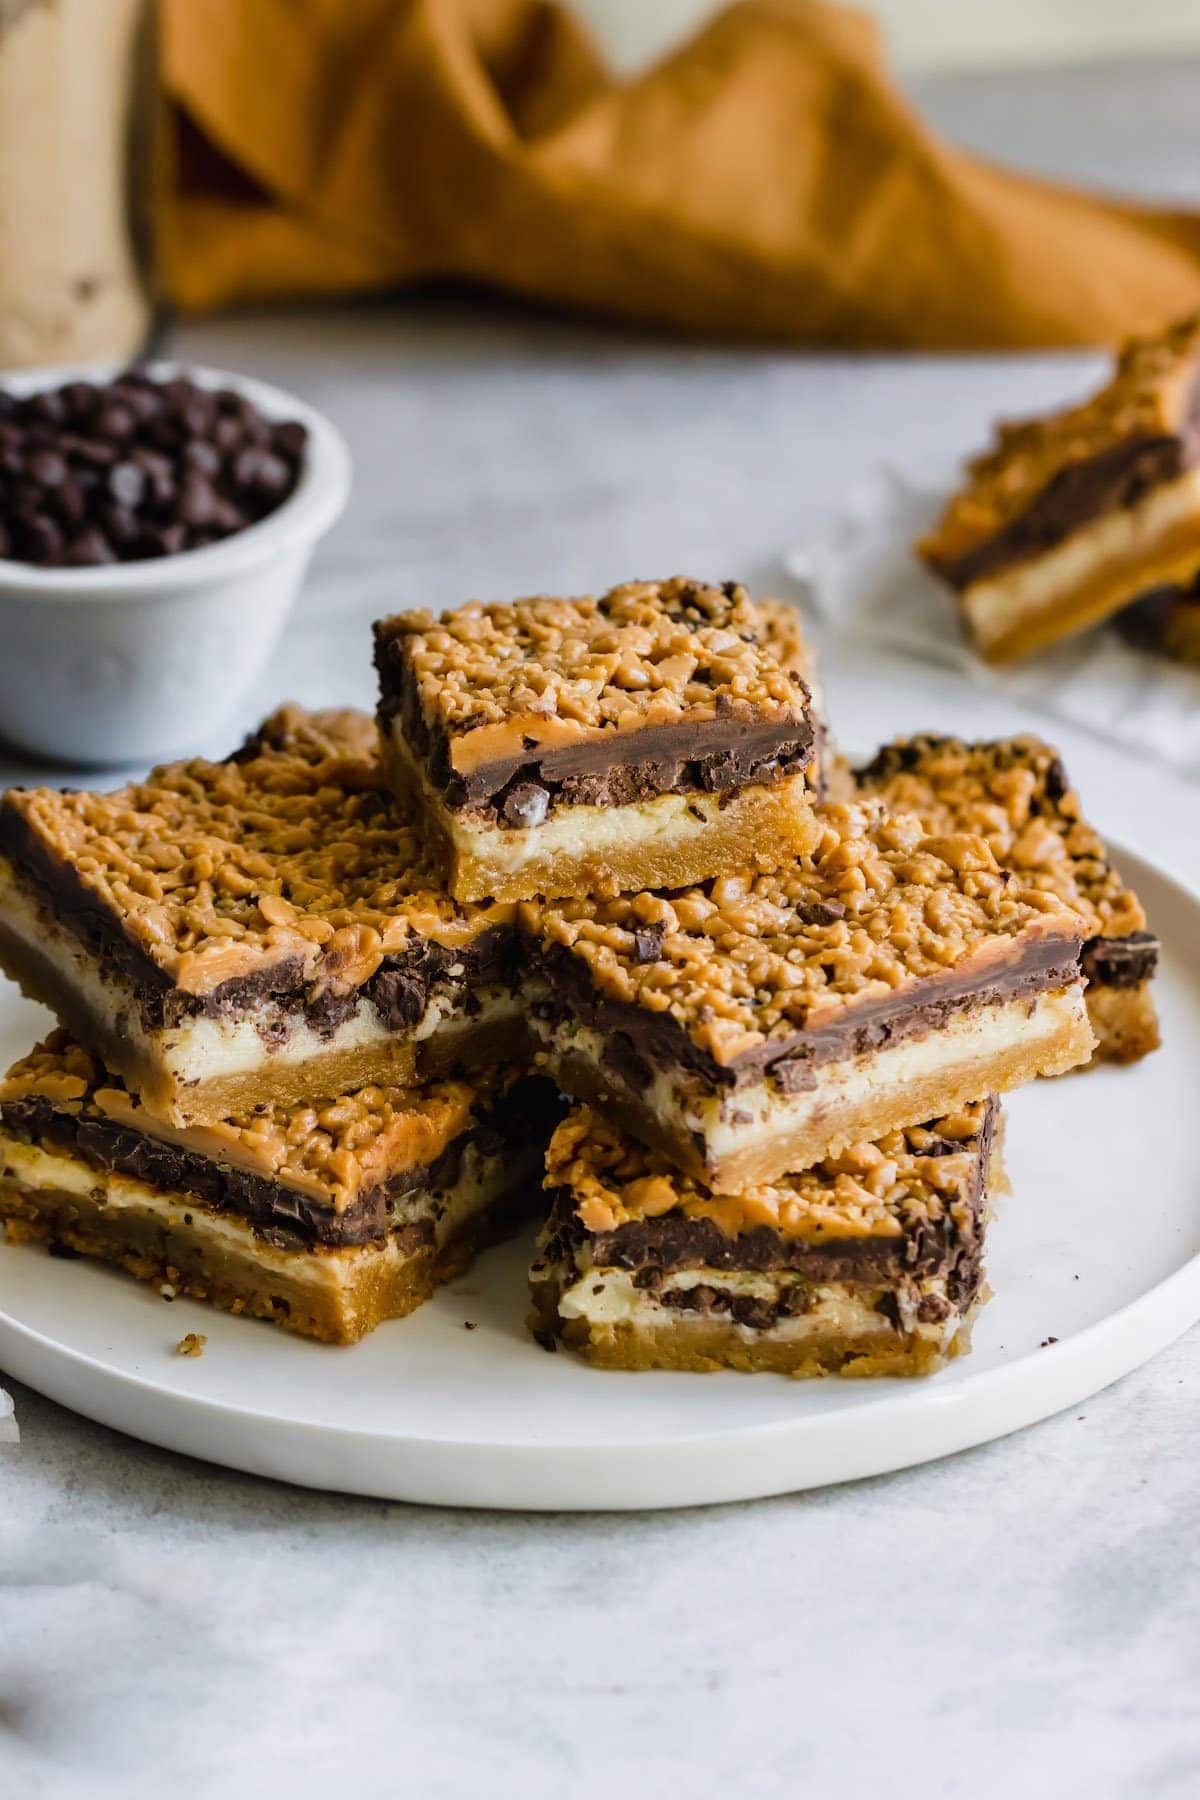 Plate of stacked chocolate cookie bars.